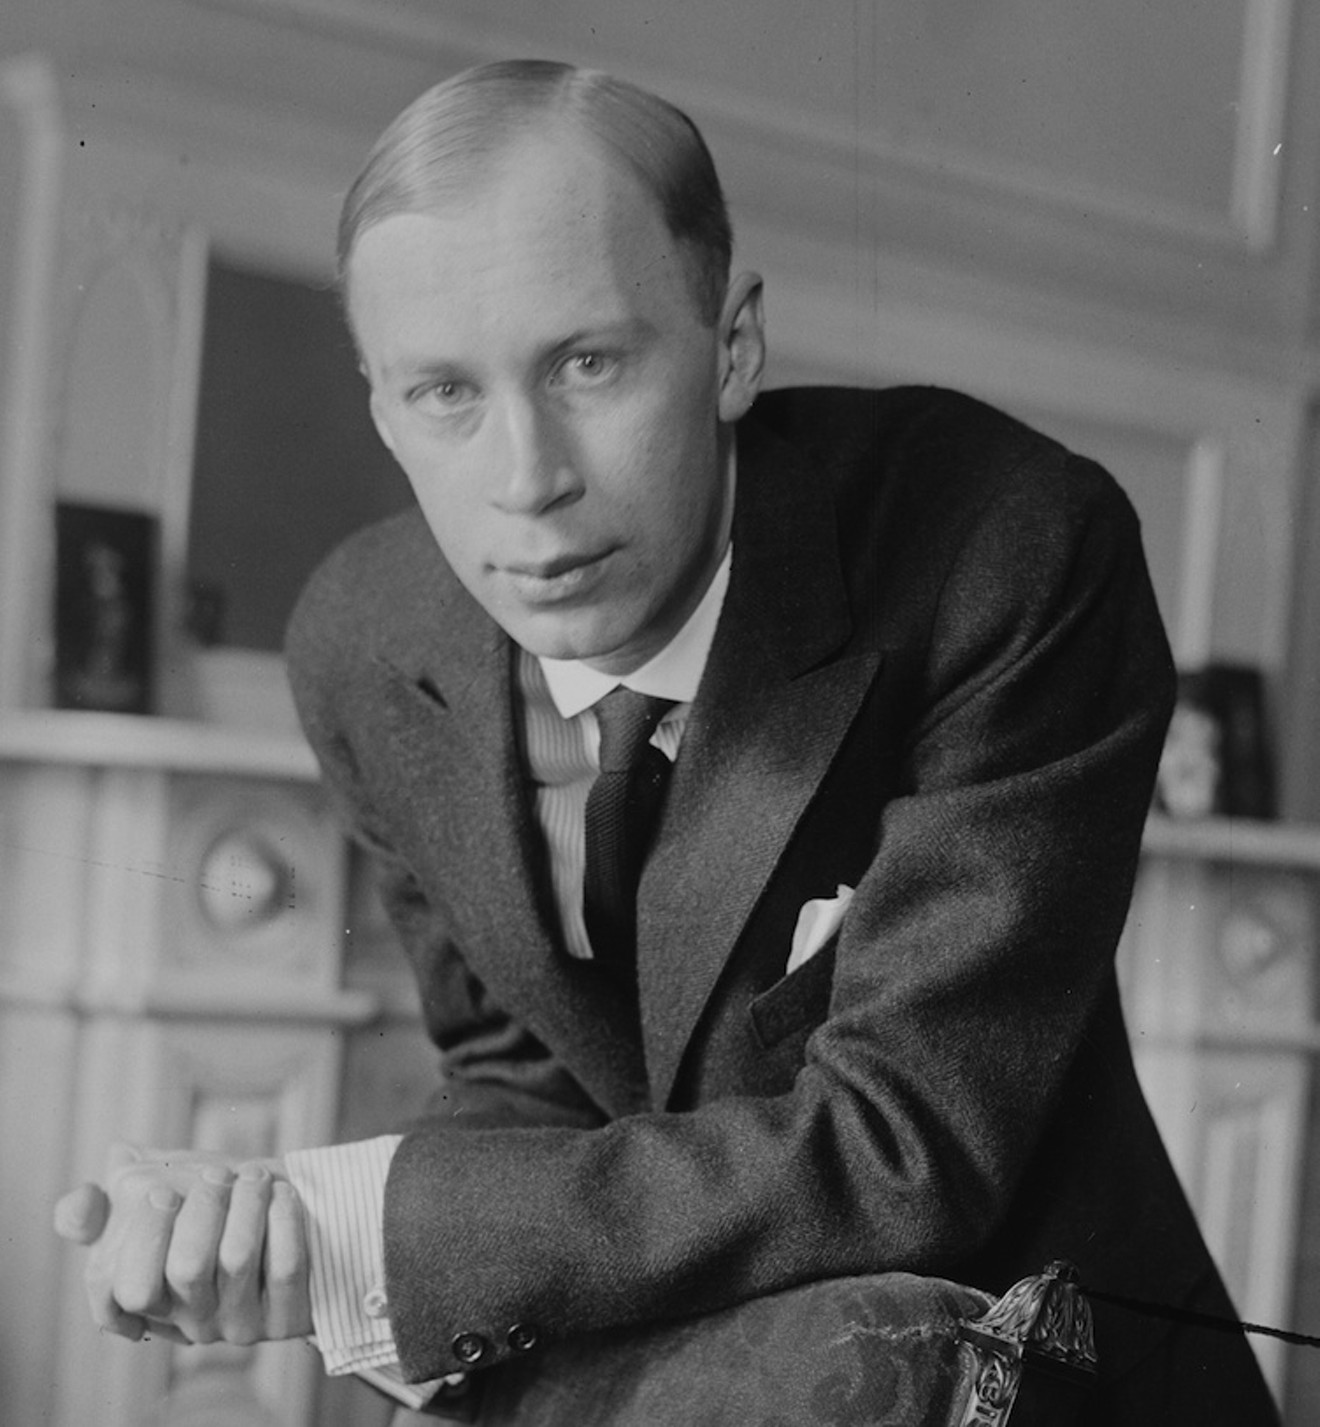 Russian composer Sergei Prokofiev doesn't look too happy about Dallas Symphony Orchestra's interpretation of his life's history.